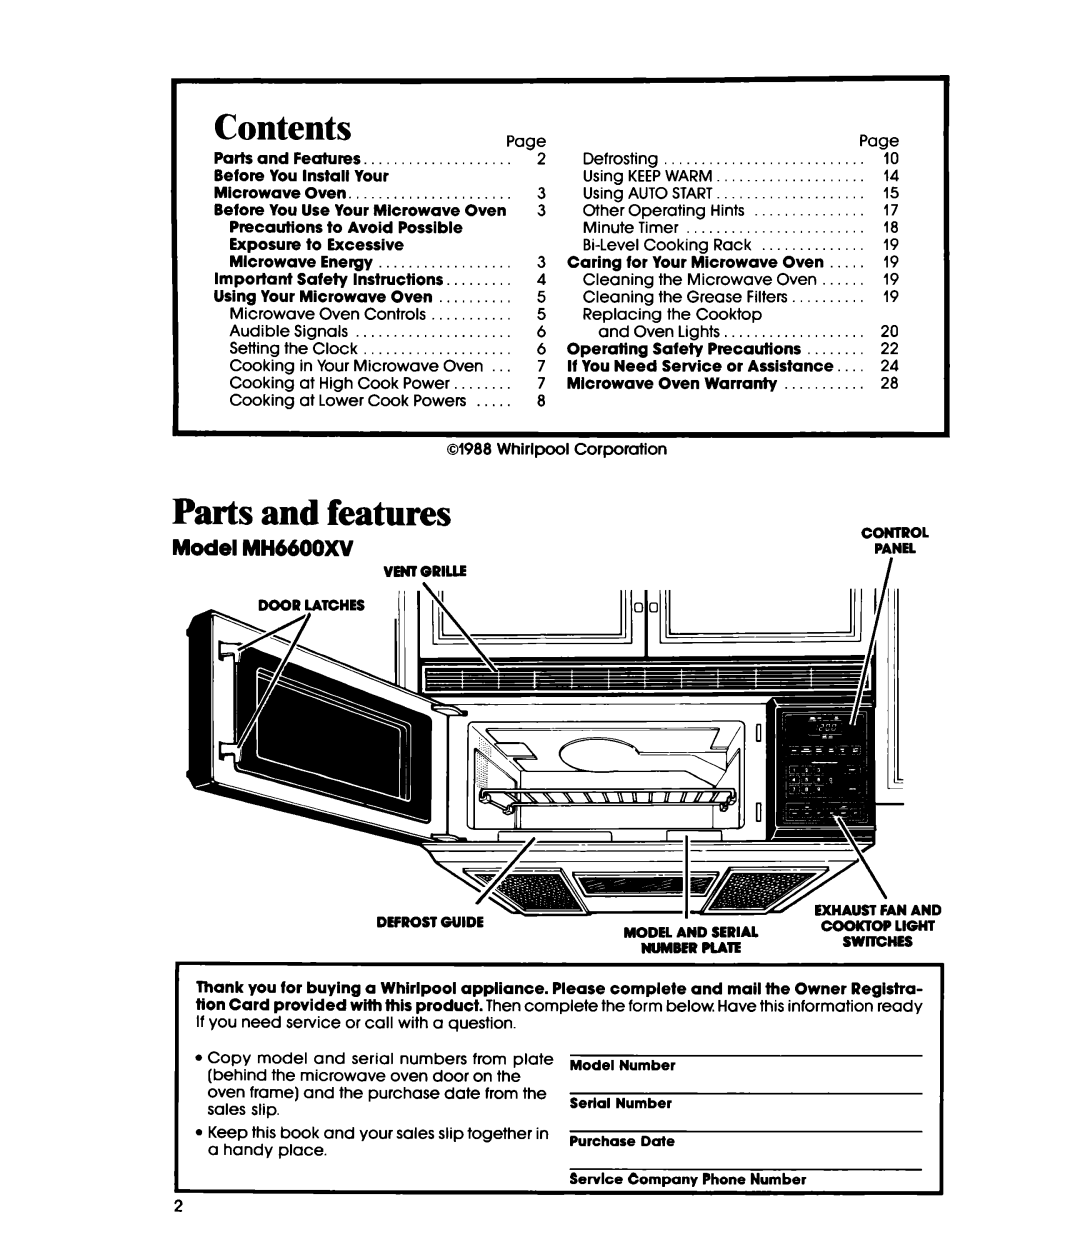 Whirlpool MH6600XW manual Parts and features, Model MH6600XV, Contents 